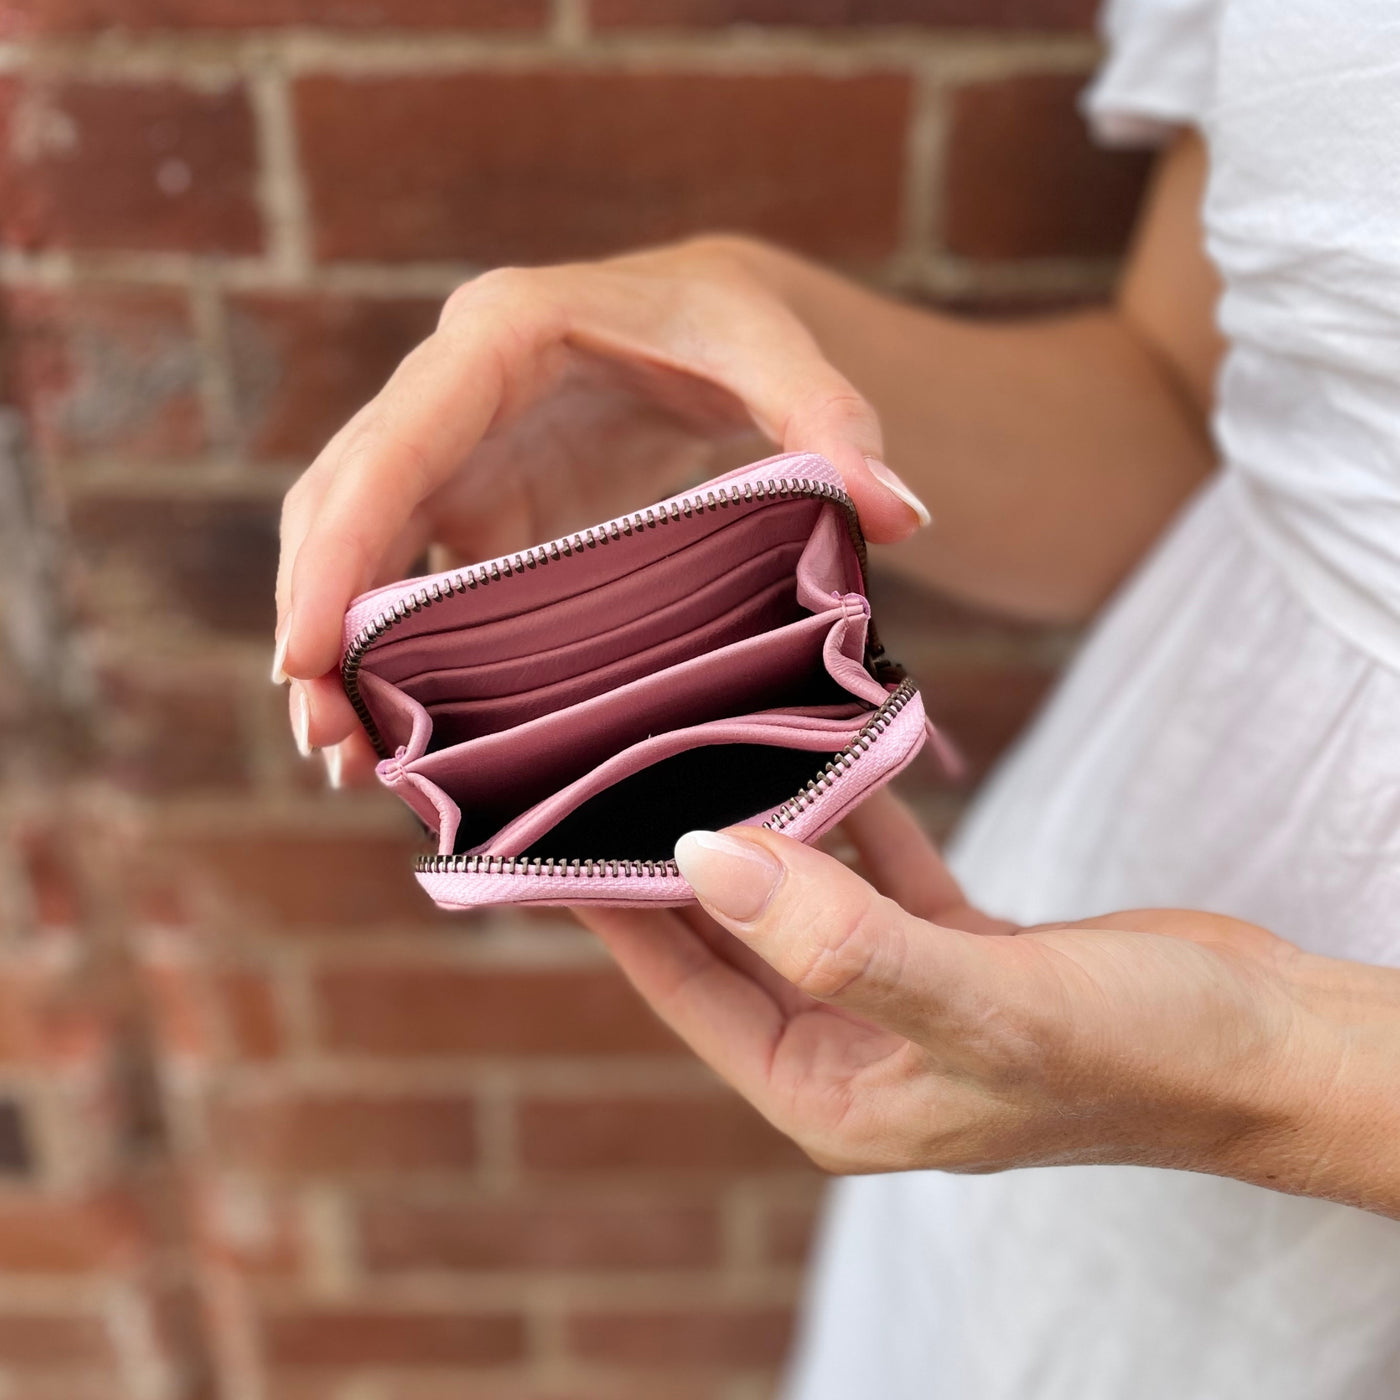 Pastel Pink Leather Claire Card Wallet